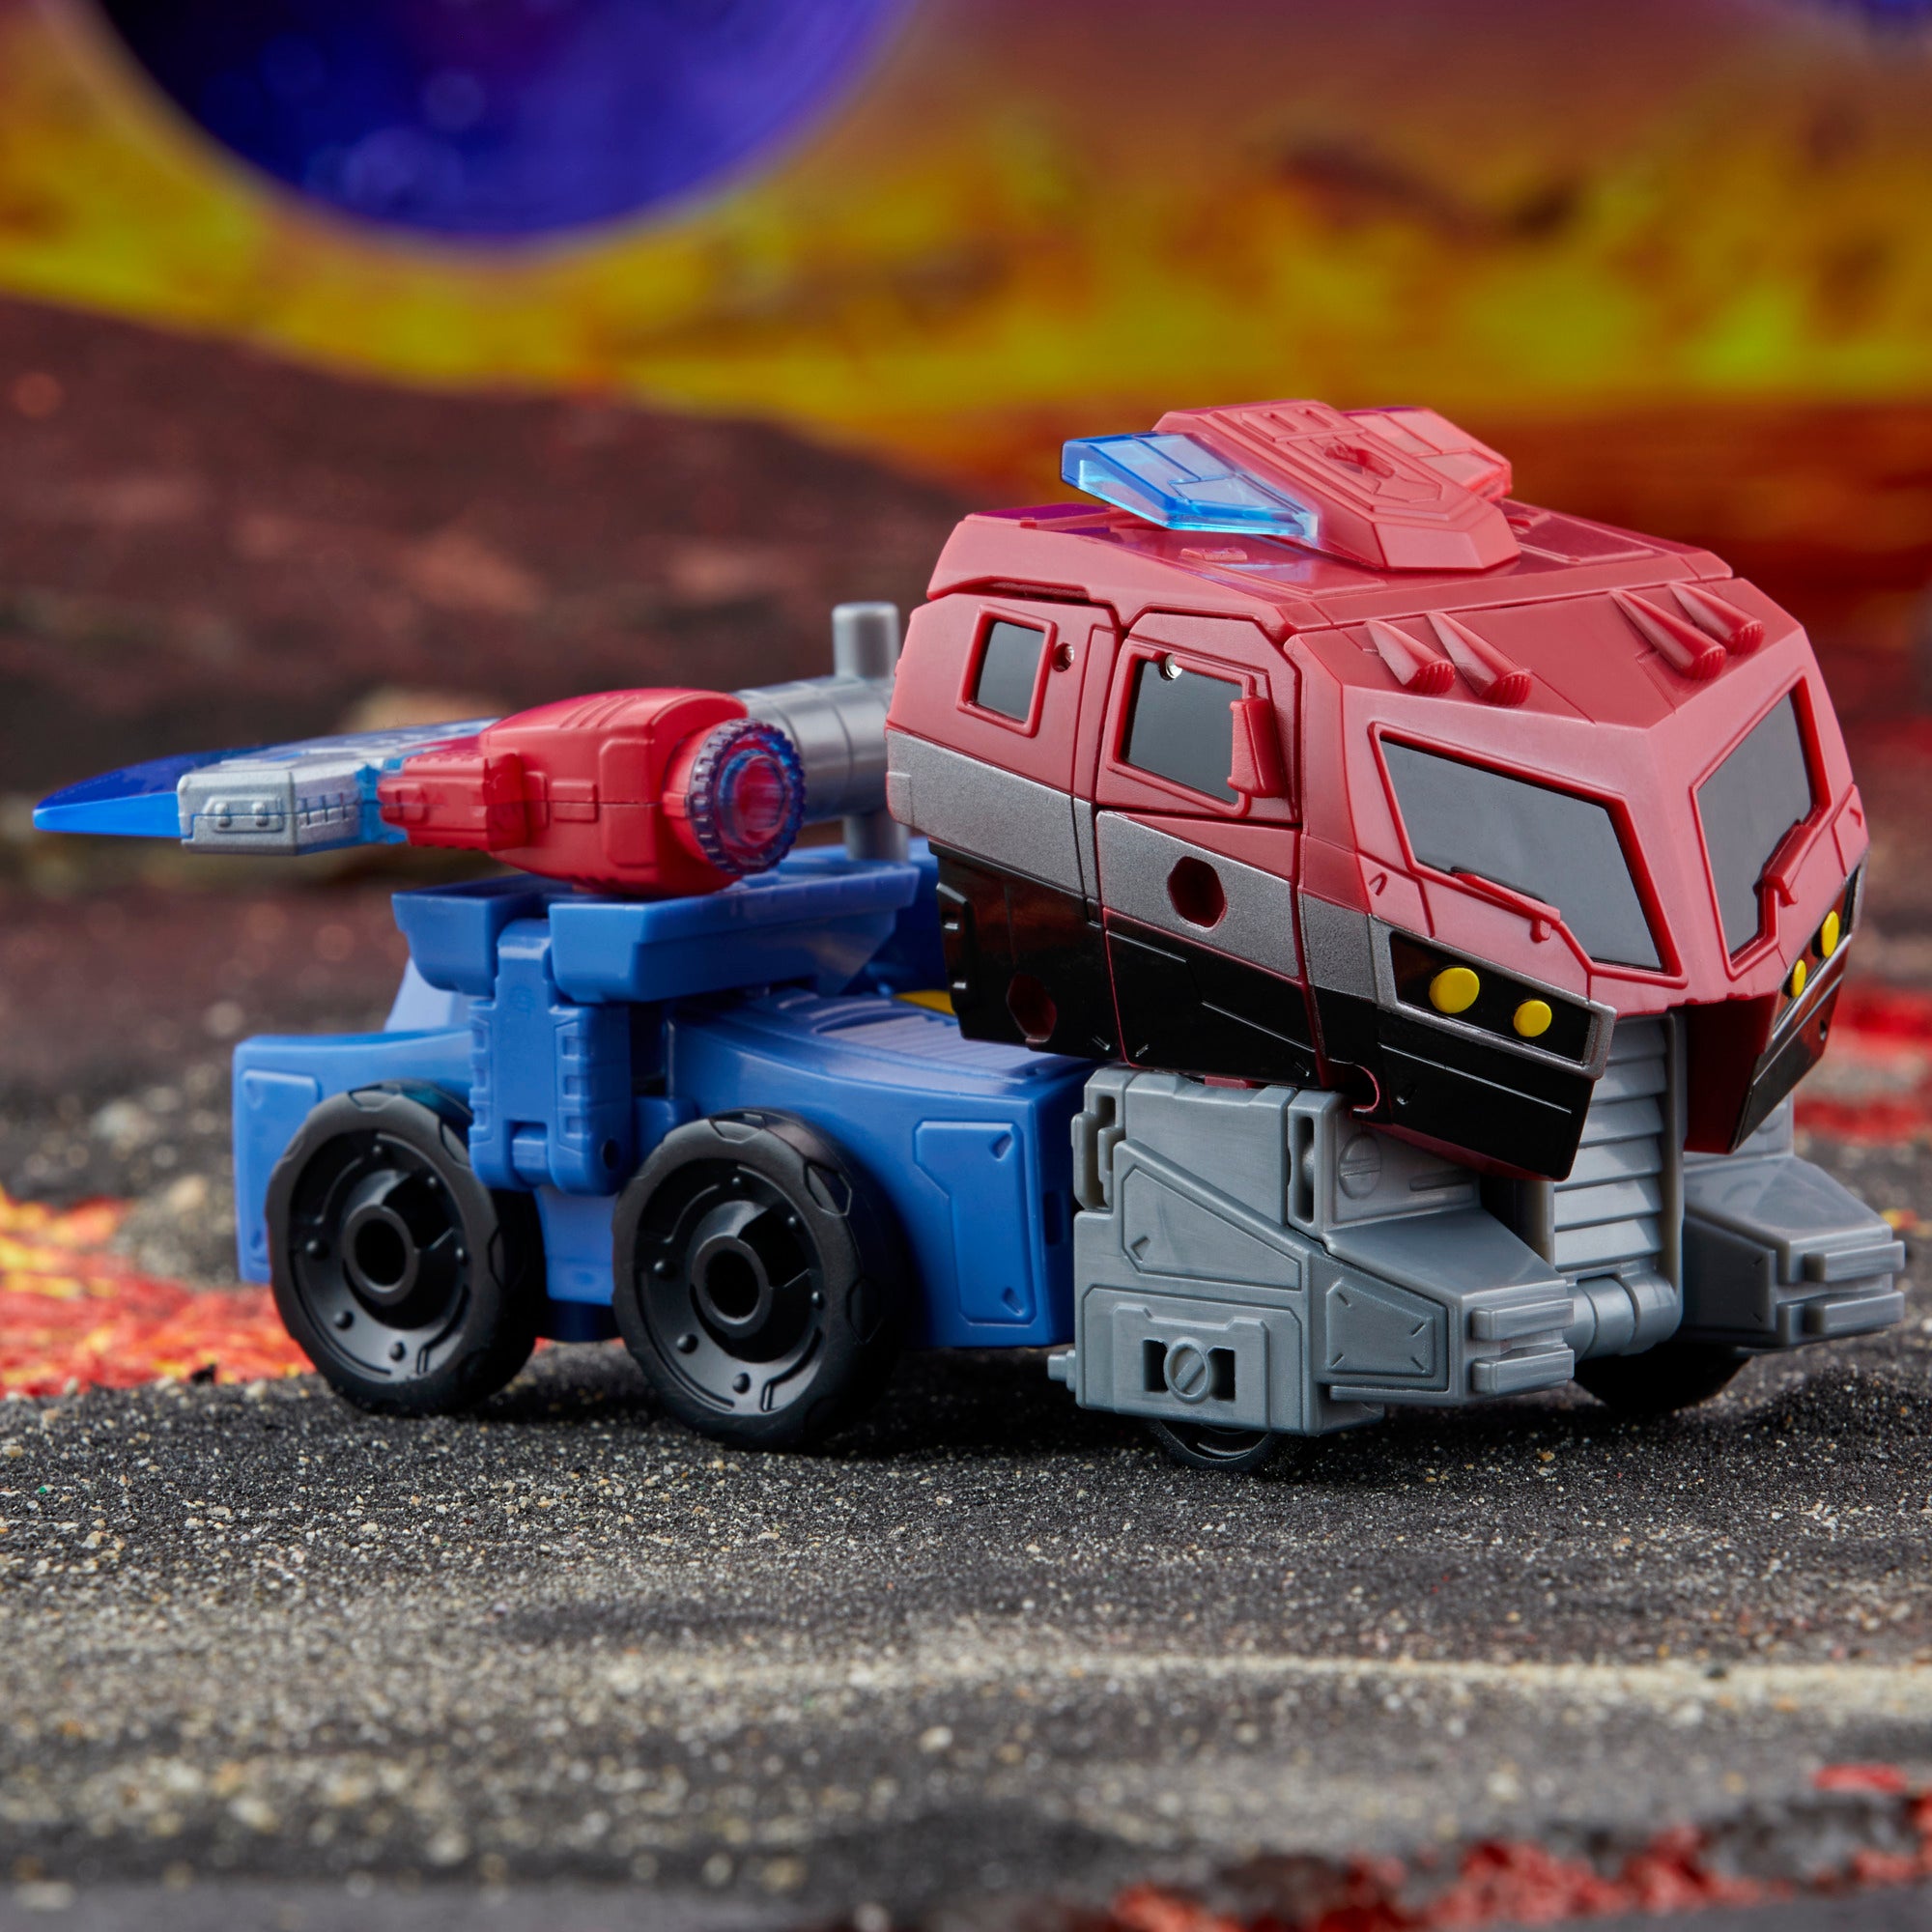 Transformers Legacy United Voyager Class Animated Universe Optimus Prime -  Presale